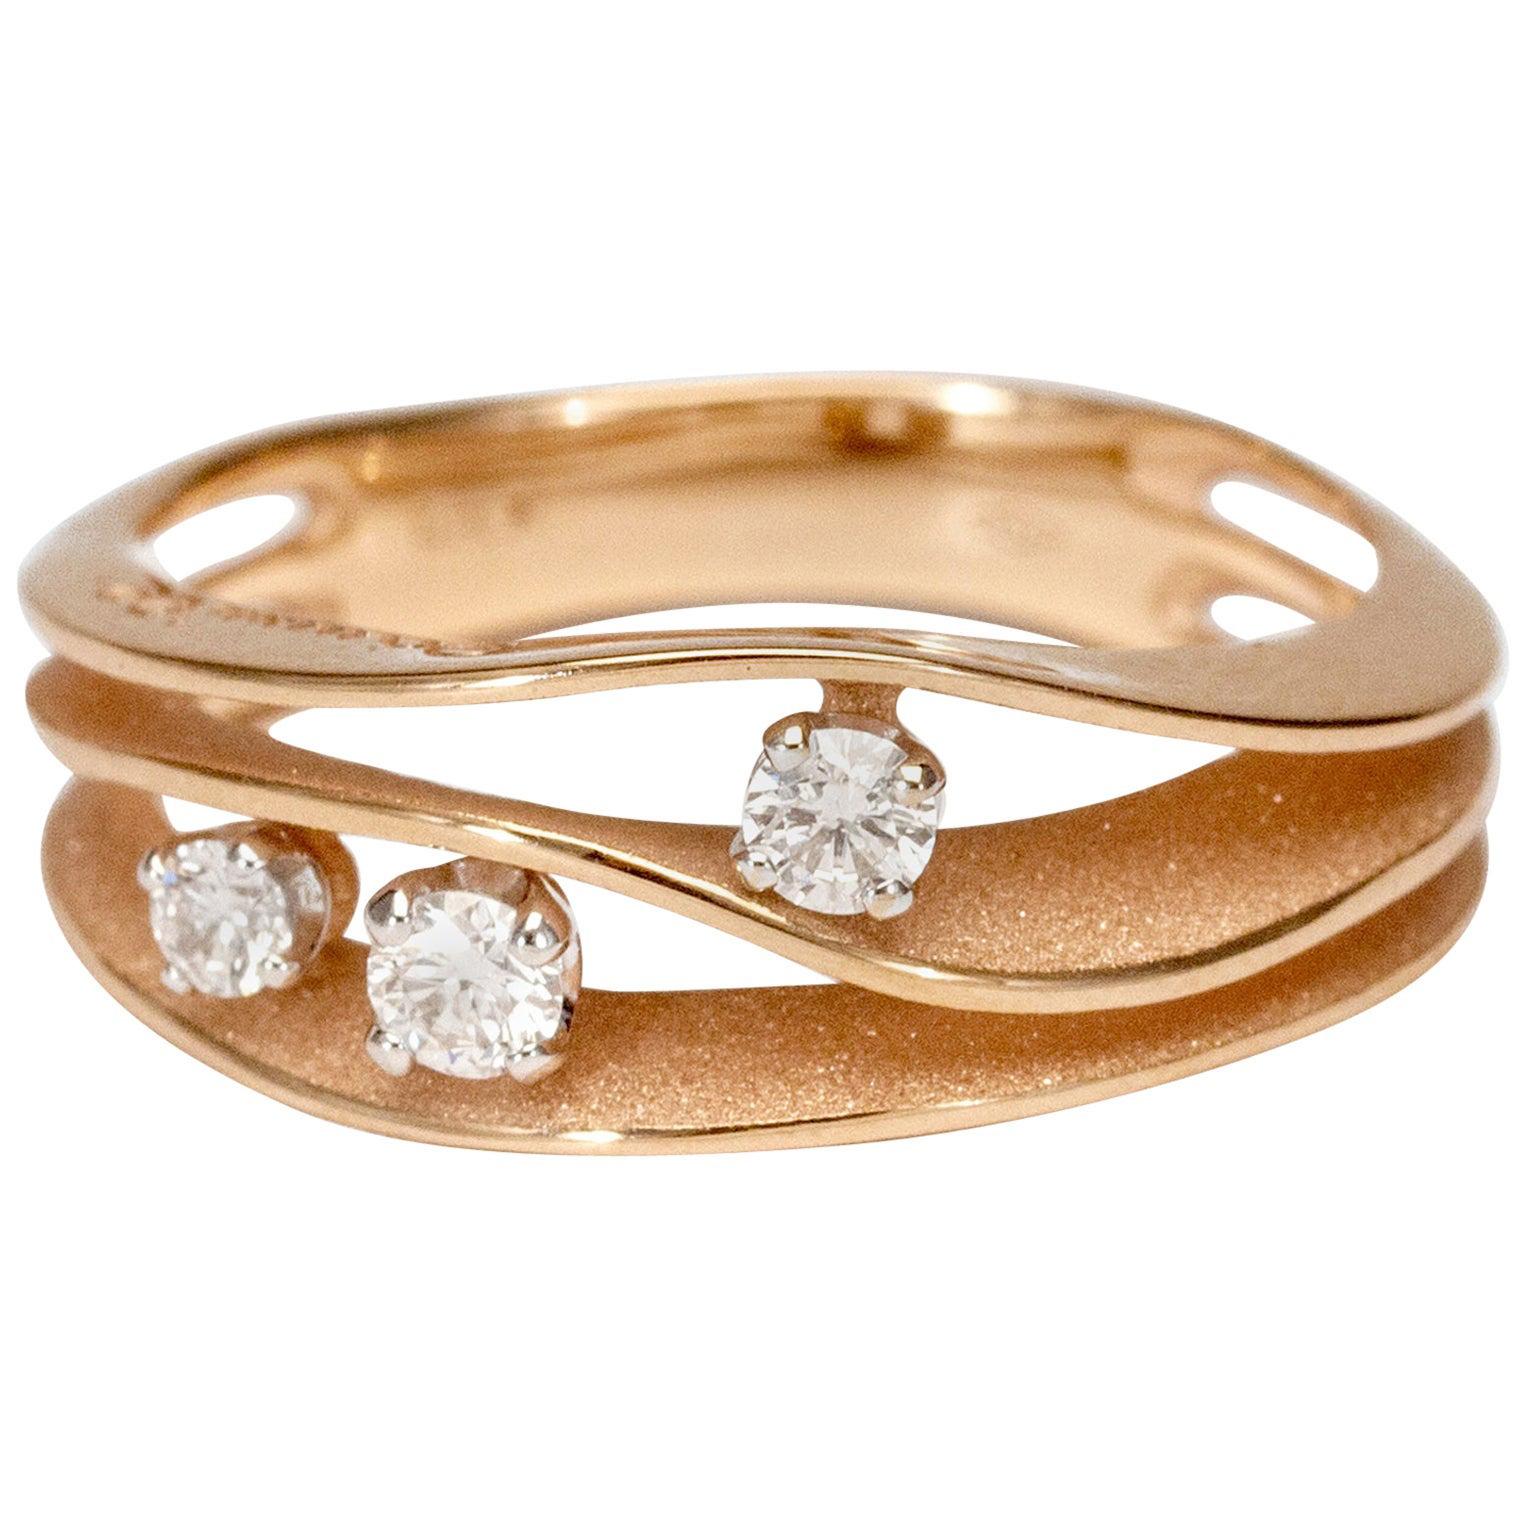 Annamaria Cammilli "Dune" Ring with Three Diamonds in 18k Pink Champagne Gold